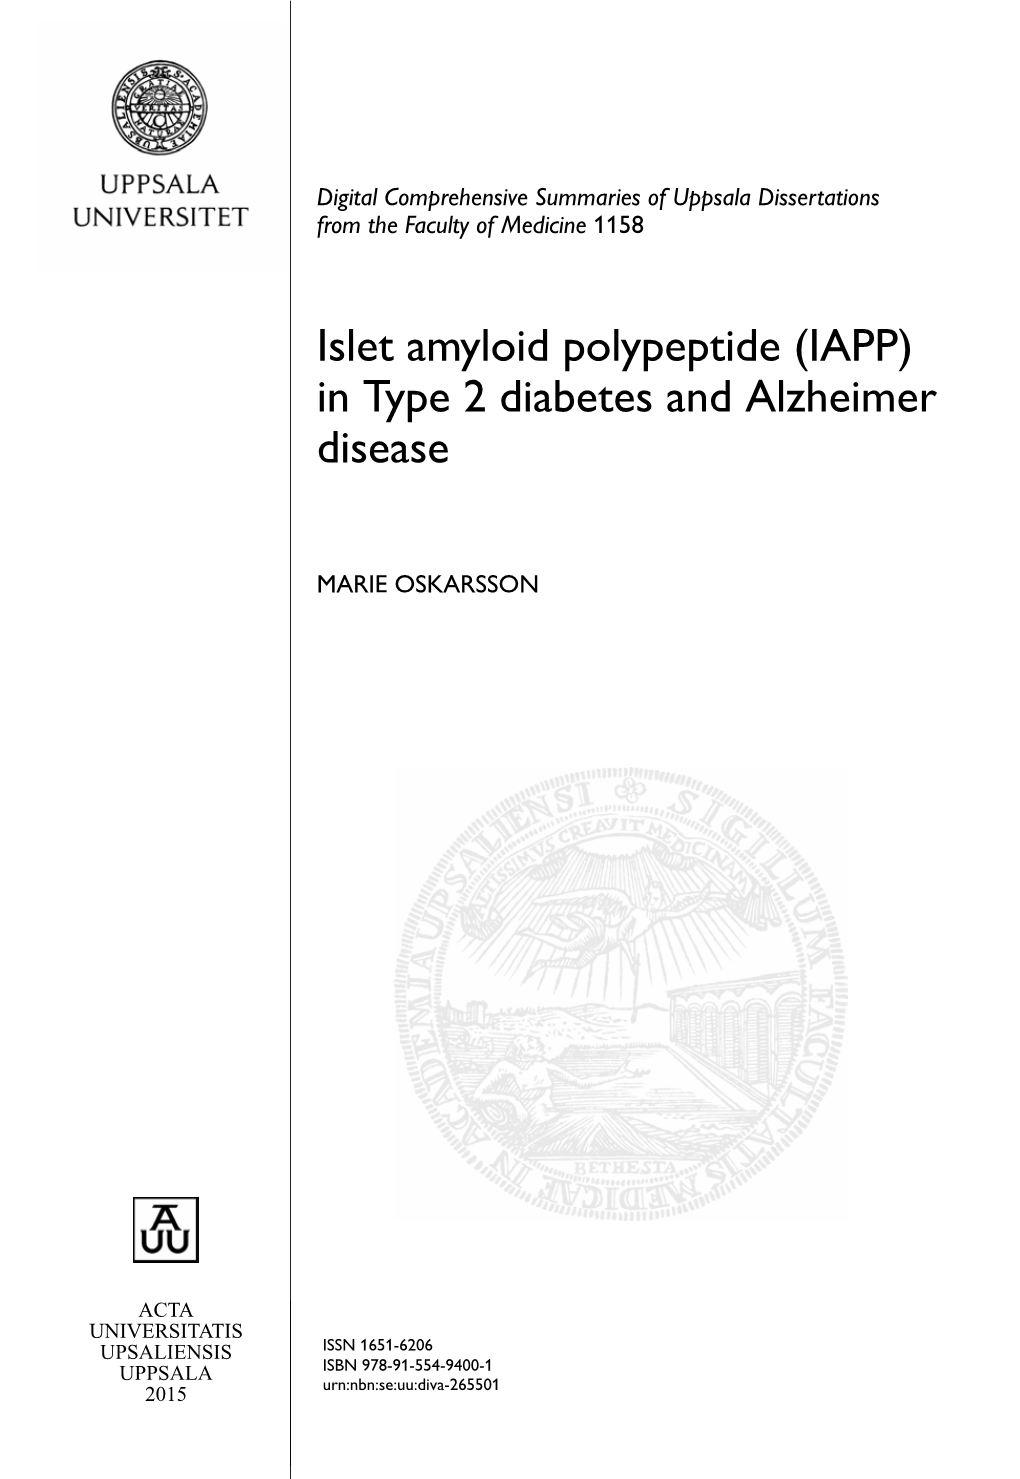 Islet Amyloid Polypeptide (IAPP) in Type 2 Diabetes and Alzheimer Disease